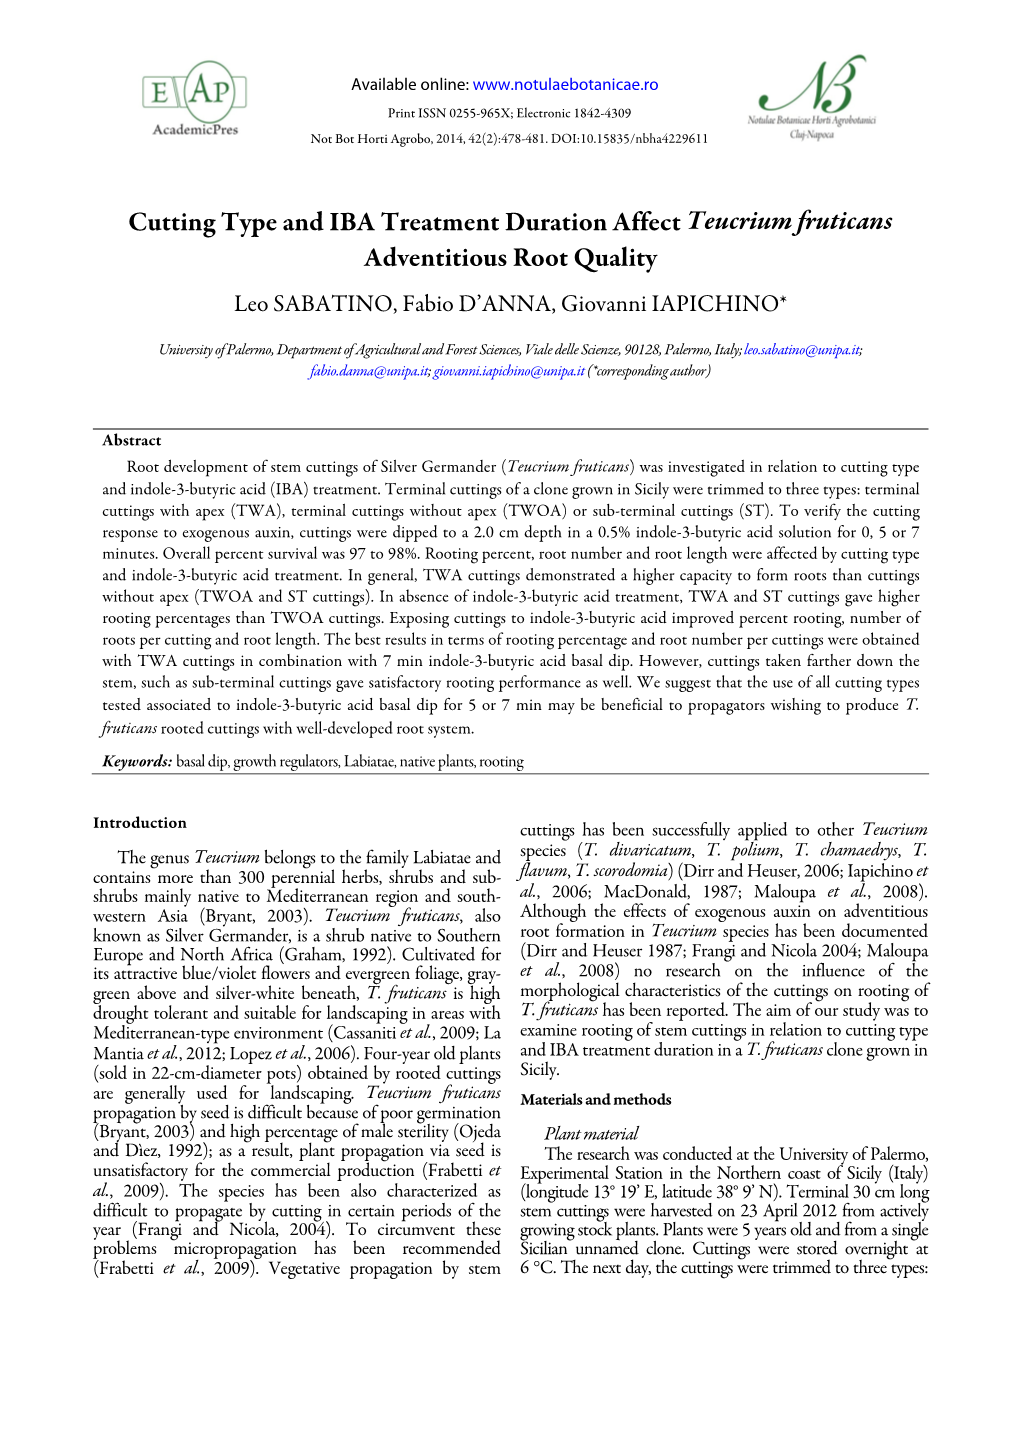 Cutting Type and IBA Treatment Duration Affect Teucrium Fruticans Adventitious Root Quality Leo SABATINO, Fabio D’ANNA, Giovanni IAPICHINO*